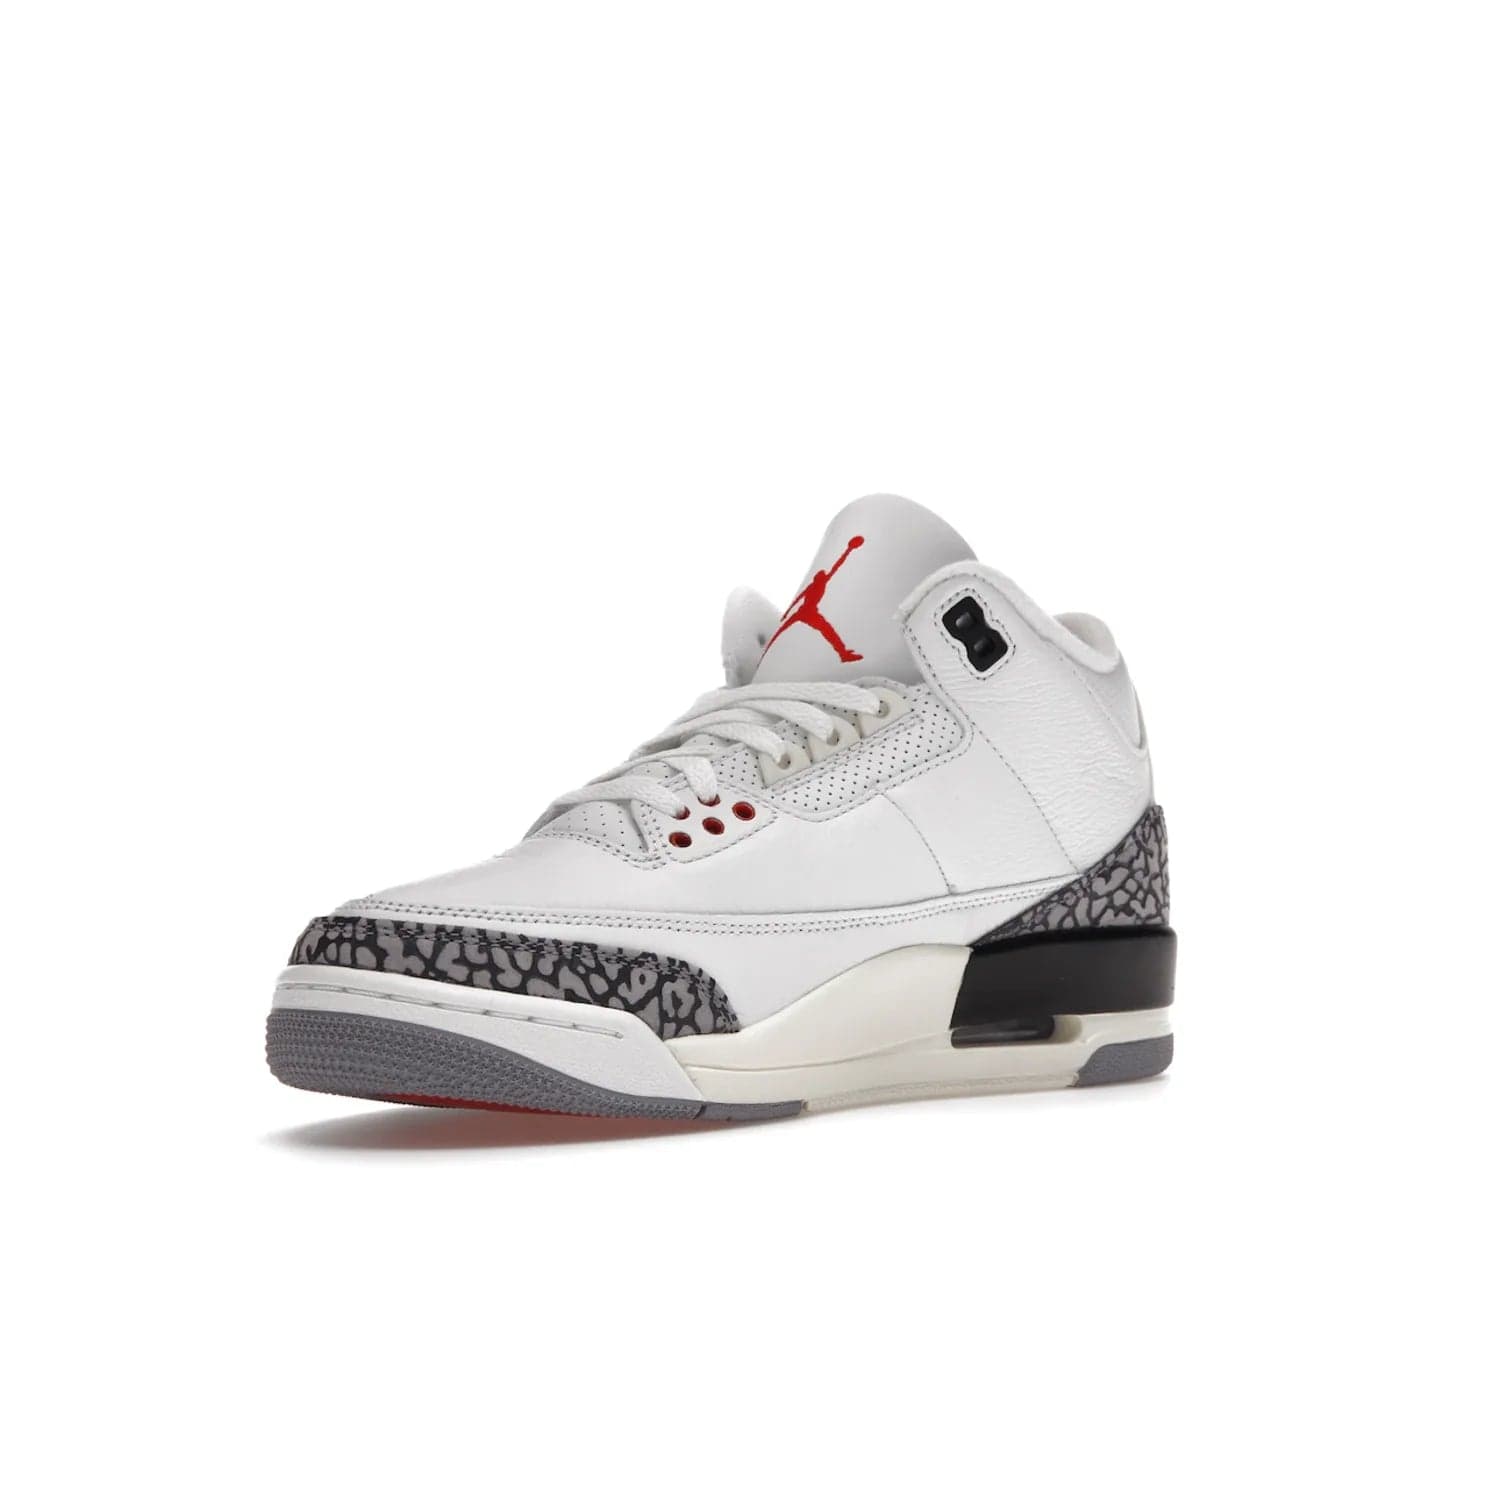 Jordan 3 Retro White Cement Reimagined - Image 15 - Only at www.BallersClubKickz.com - The Reimagined Air Jordan 3 Retro in a Summit White/Fire Red/Black/Cement Grey colorway is launching on March 11, 2023. Featuring a white leather upper, off-white midsoles and heel tabs, this vintage-look sneaker is a must-have.